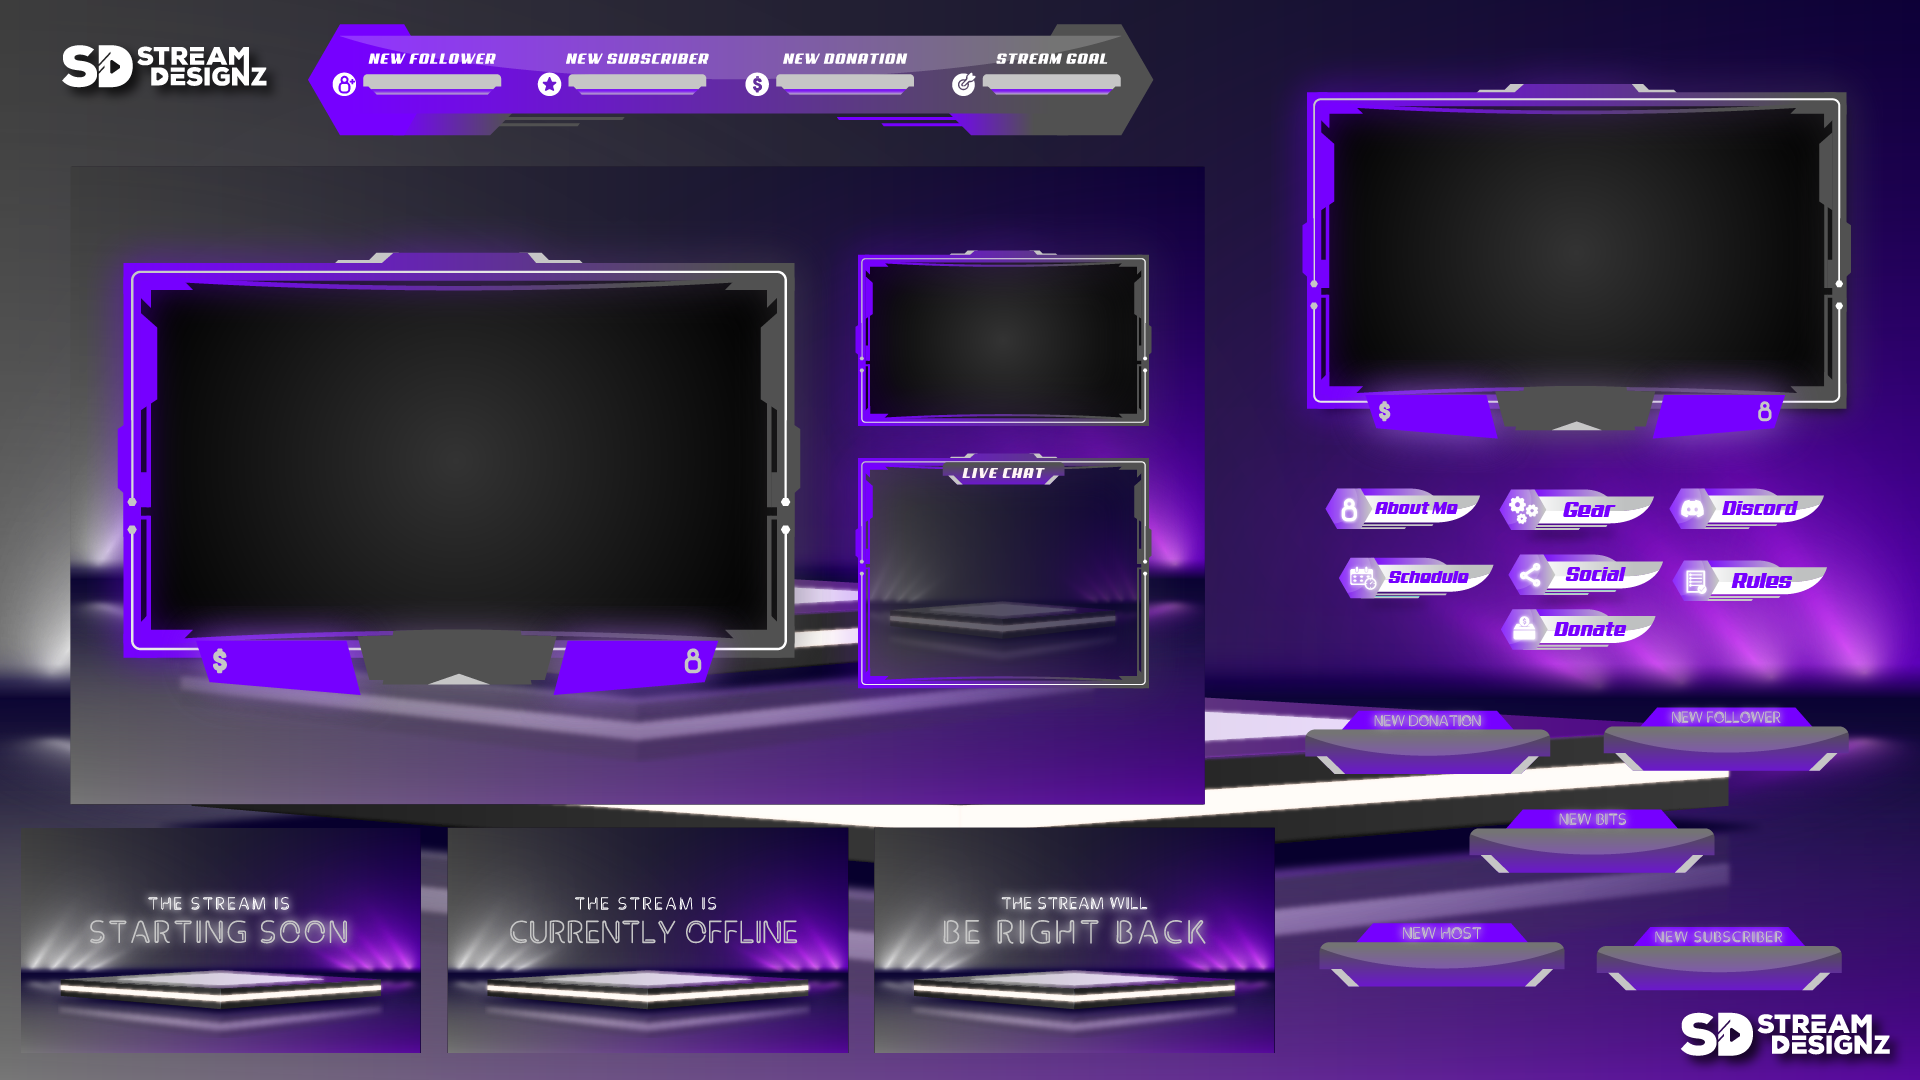 Animated stream overlay package Ultraviolet feature image stream designz